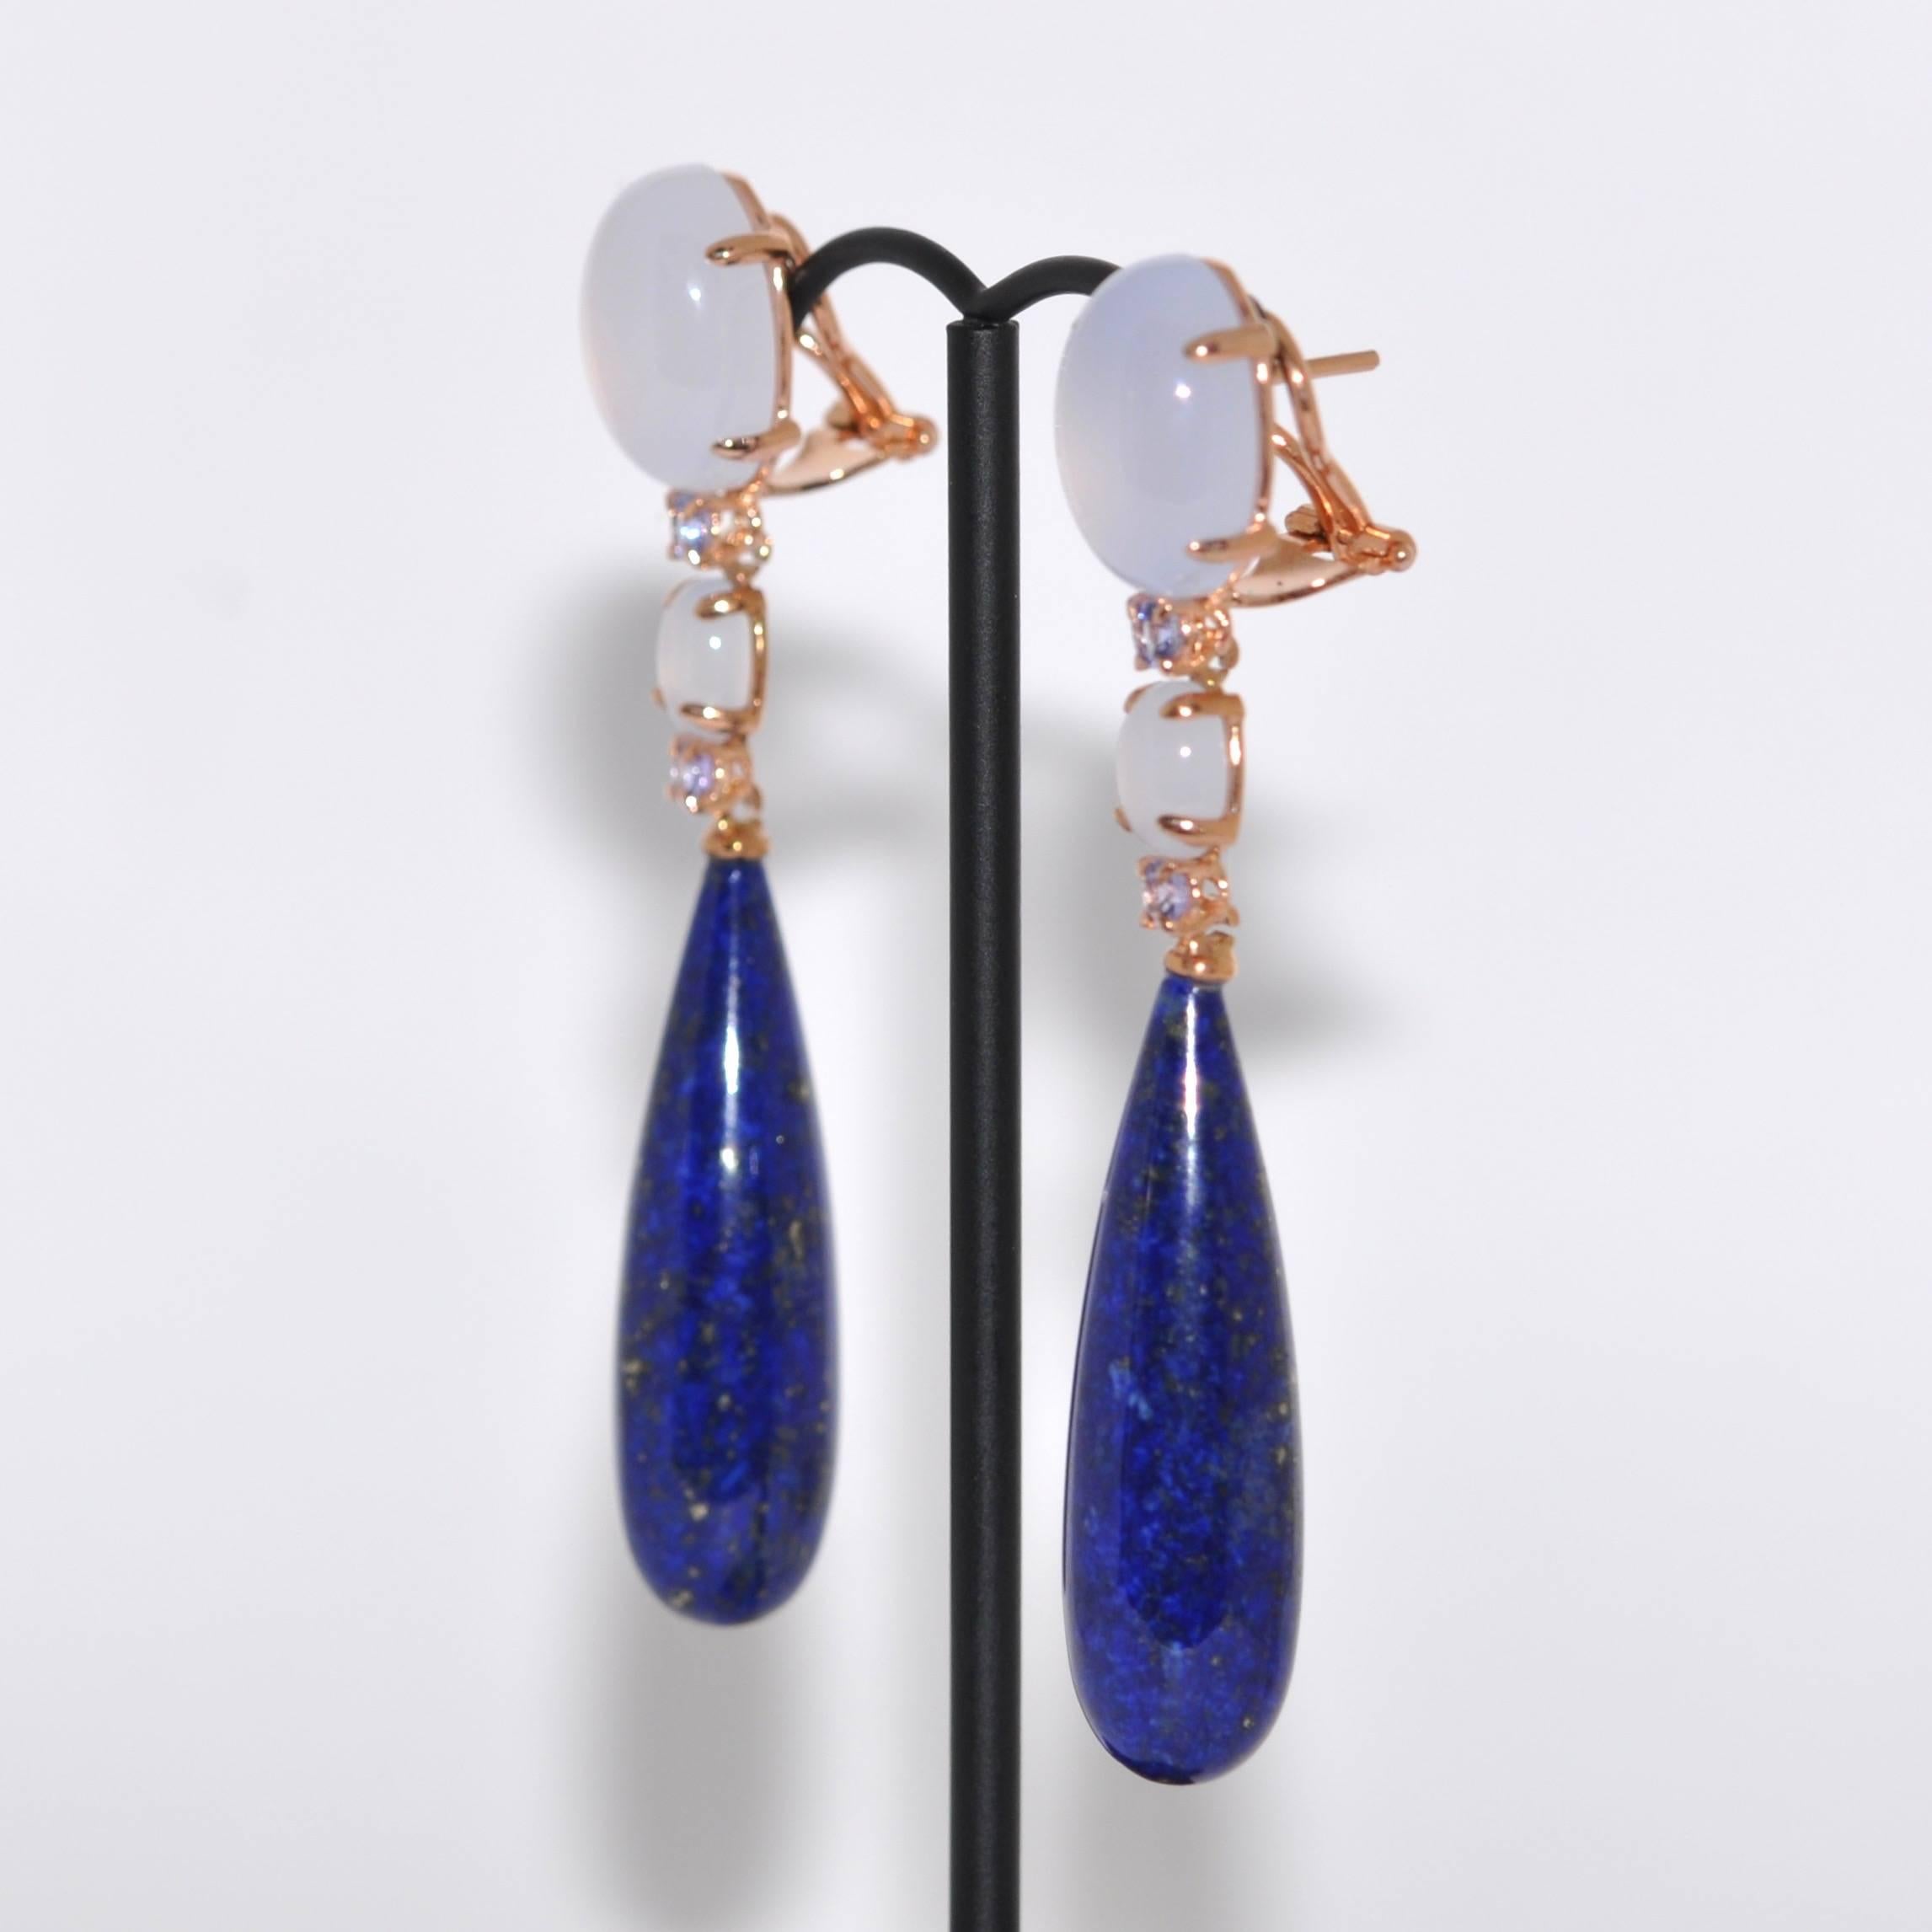 Discover this Lapis Lazuli, Chalcedony and Tanzanite Rose Gold Chandelier Earrings.
French Collection by Mesure et Art du Temps.

The benefit of the Lapis Lazuli is that they uses water energy. It then regulates the kidneys and the bladder. At the